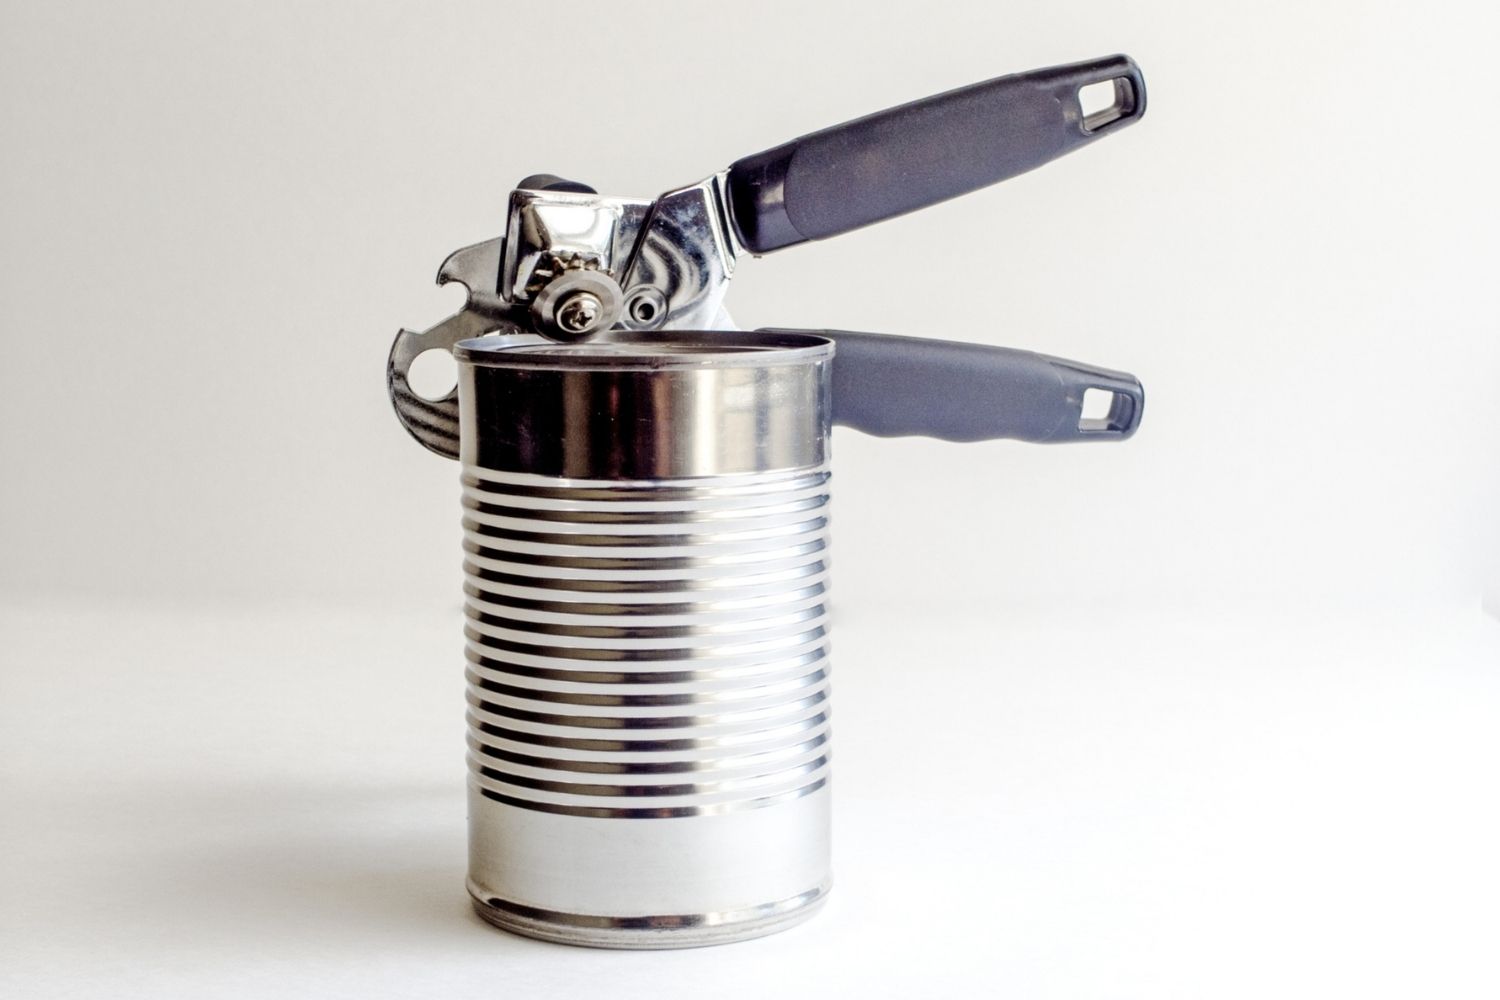 How To Clean a Can Opener